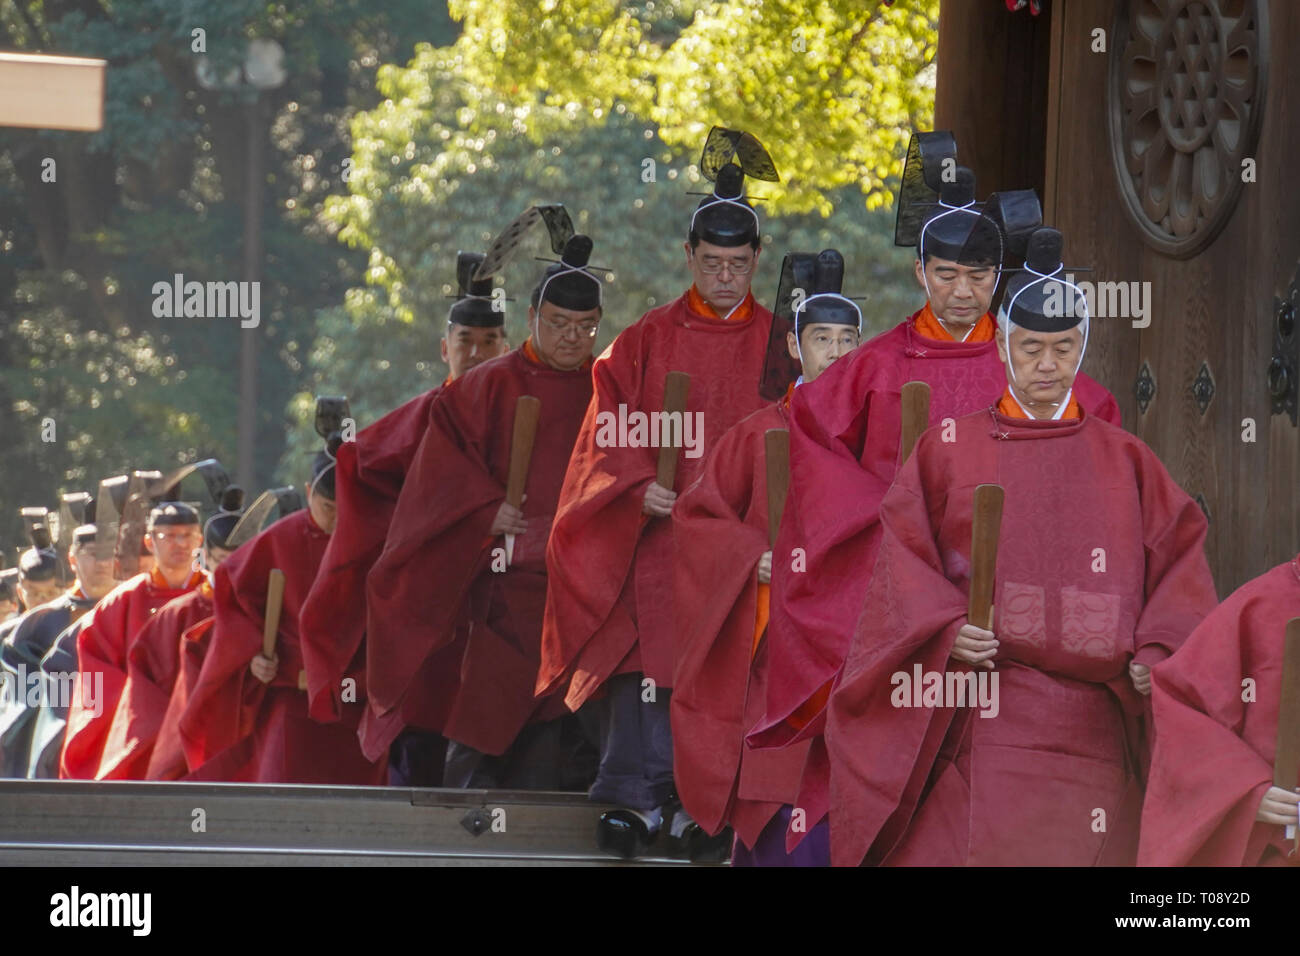 Priests in a procession at Meiji Shrine located in Shibuya, Tokyo, Ceremony to commemorate Emperor Meiji's birthday on November 3rd Stock Photo